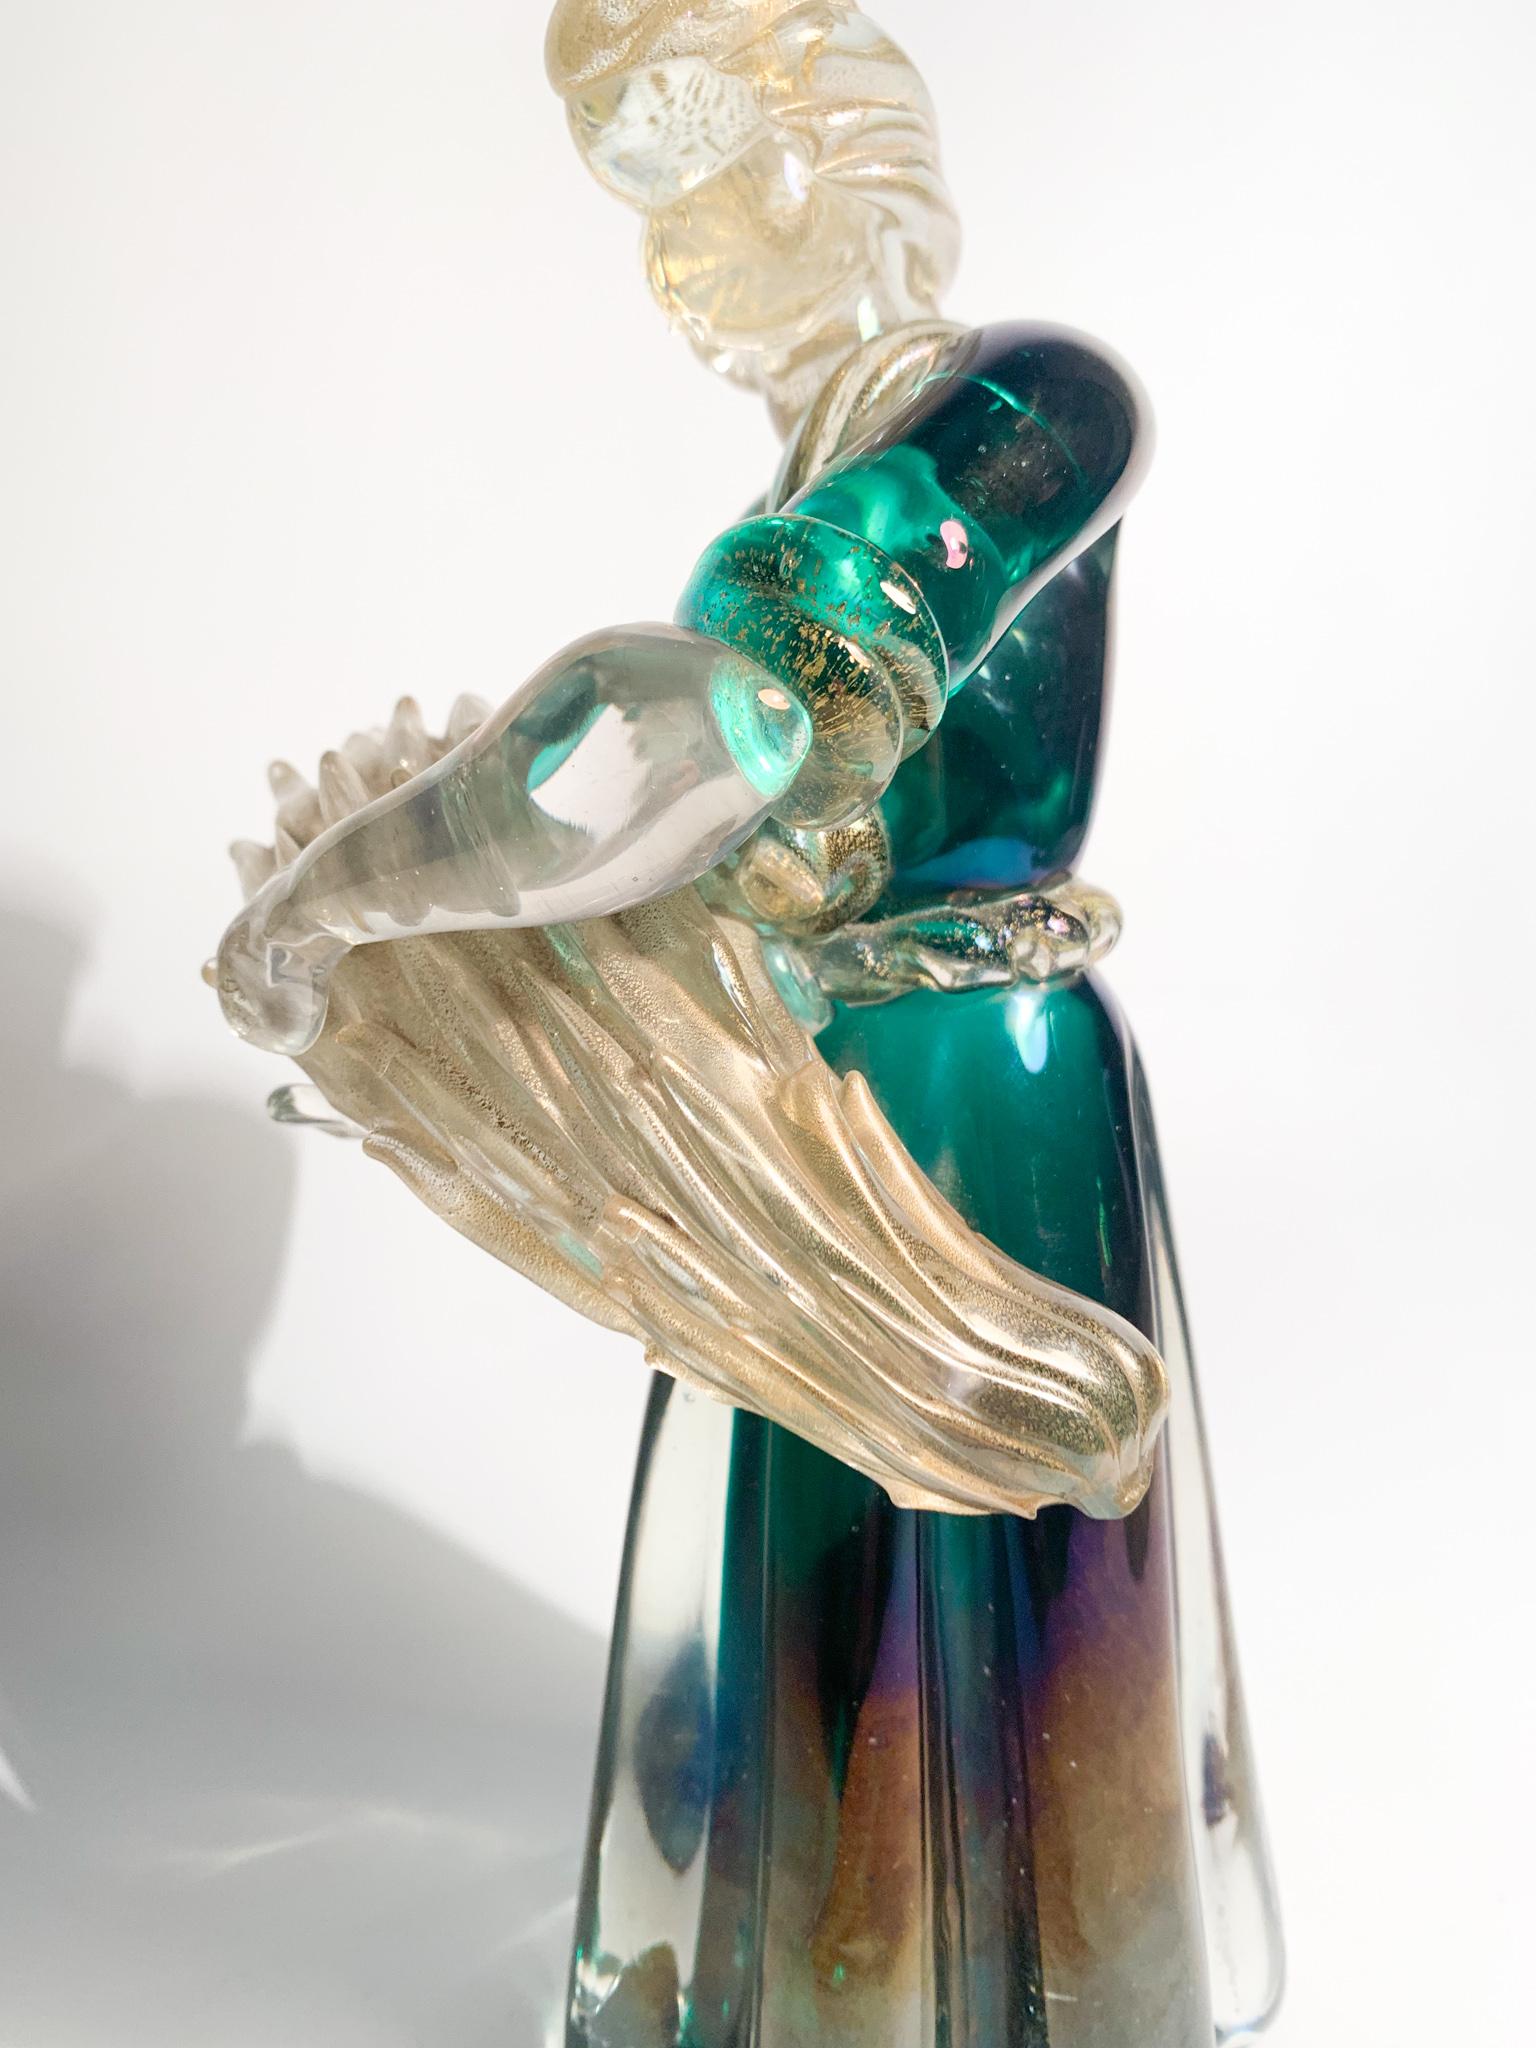 Iridescent Murano Glass Sculpture with Gold Leaves by Archimede Seguso 1940s For Sale 5